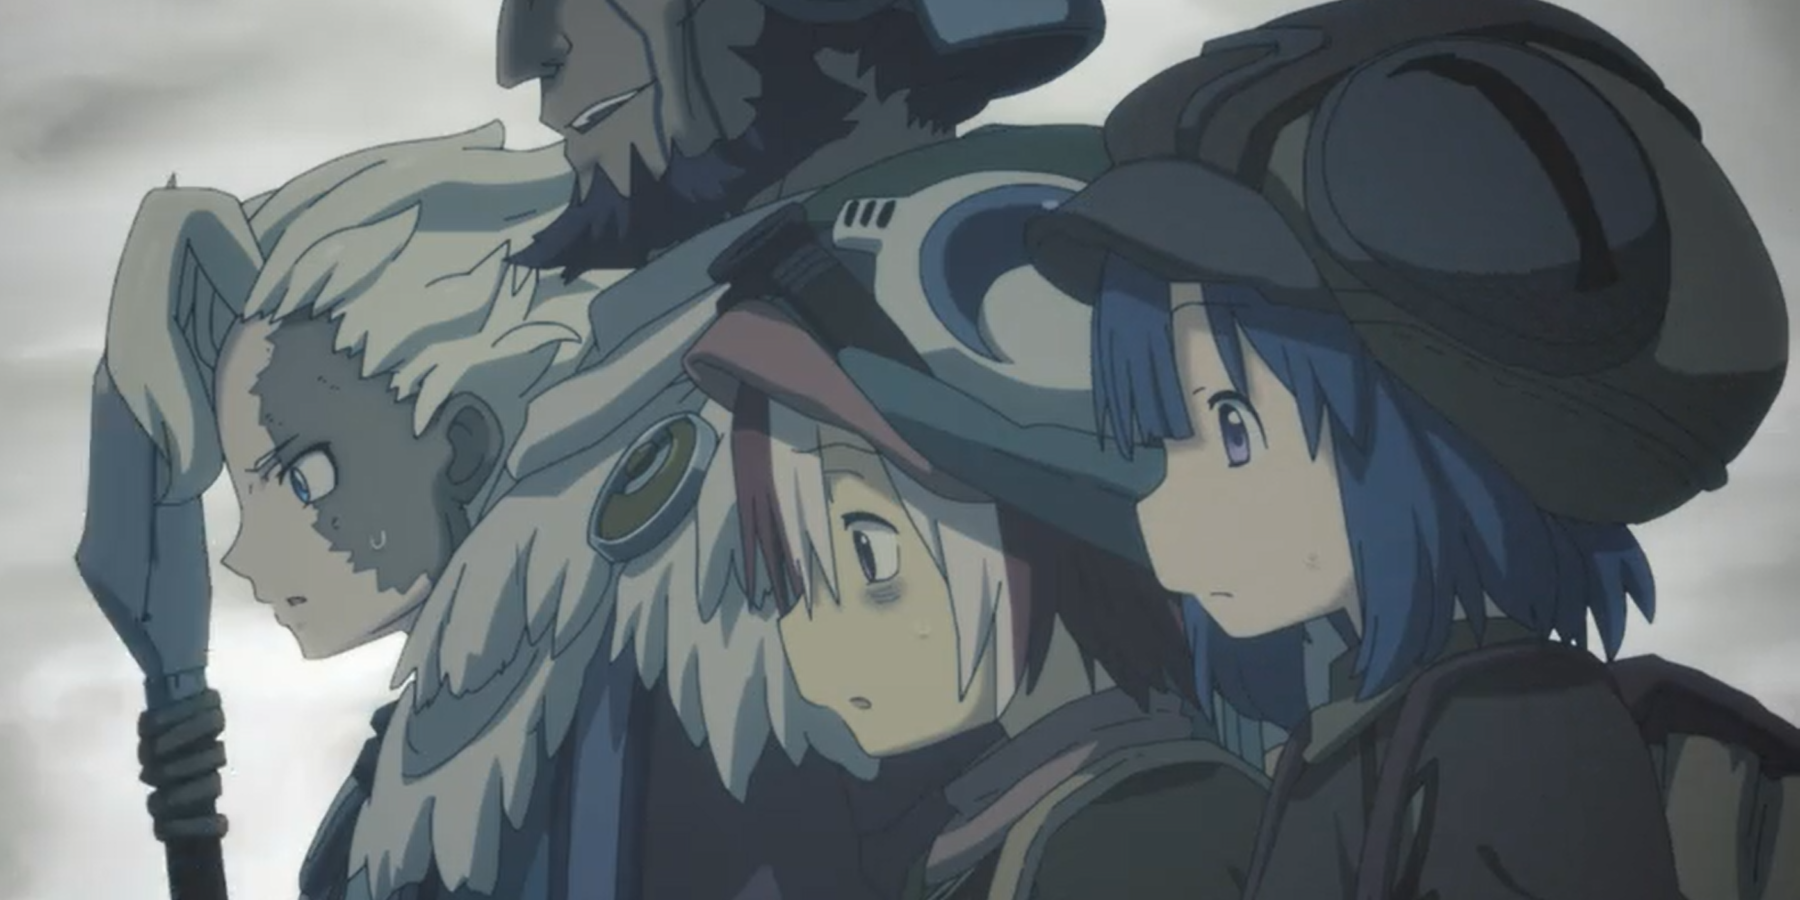 Made in Abyss: Season 2 Episode 2